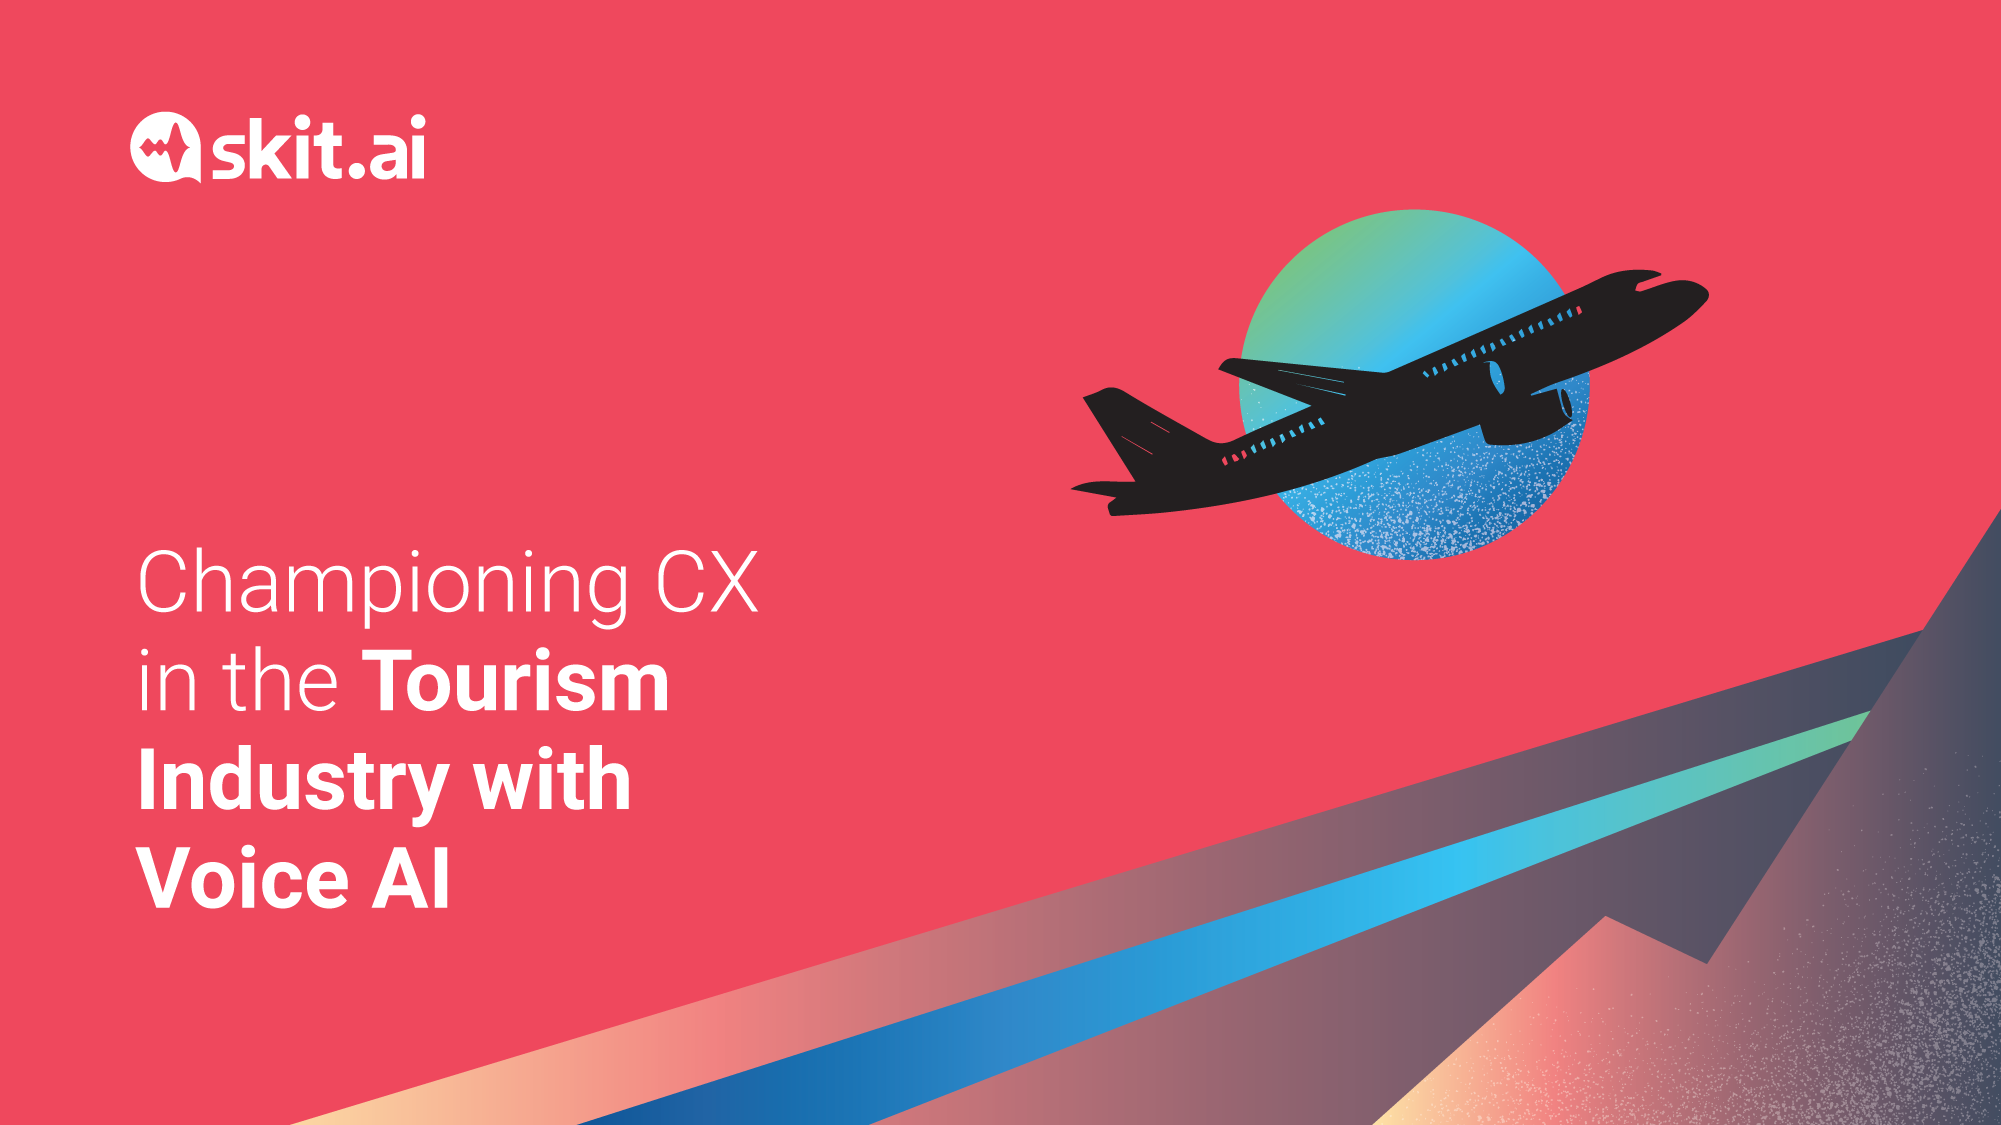 Voice AI for Improving CX in Travel Tourism